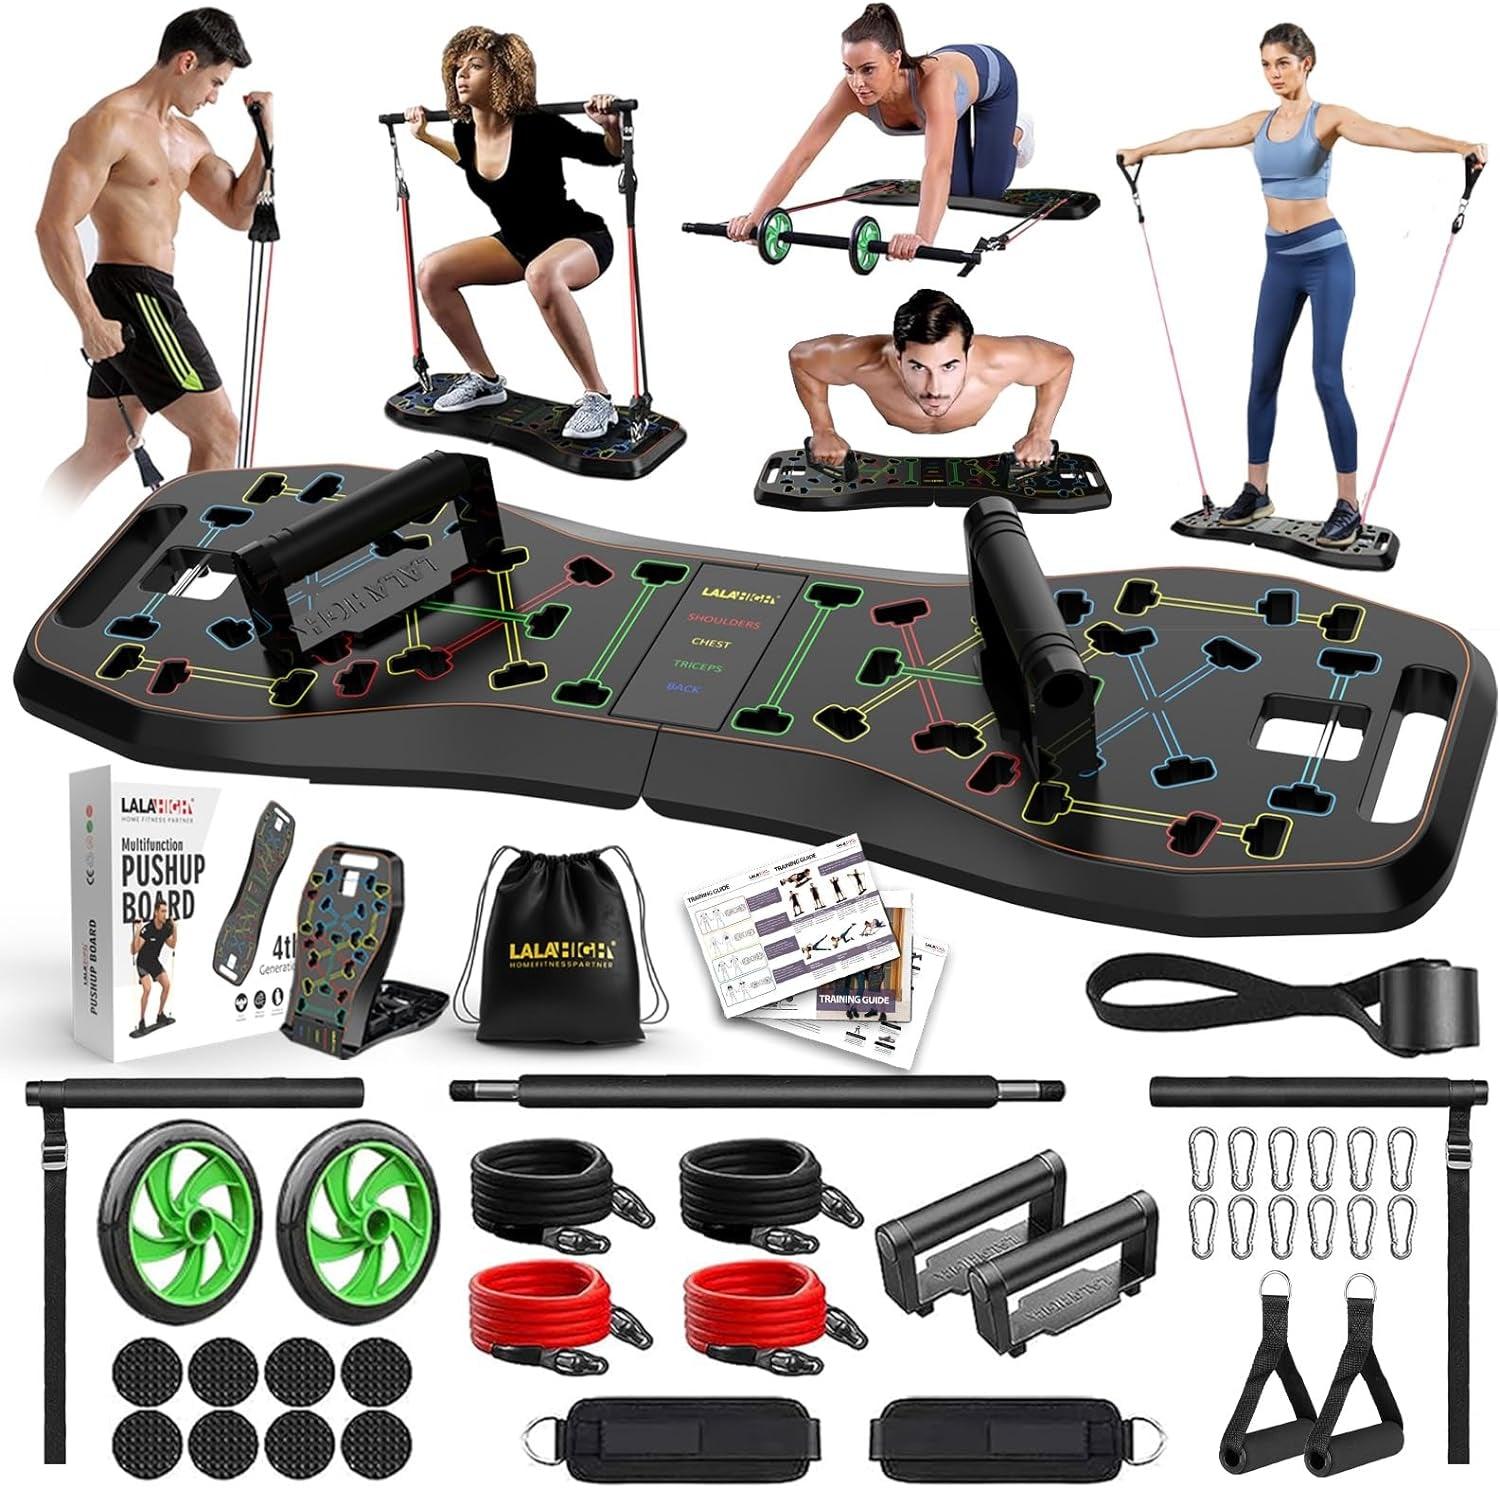 LALAHIGH Portable Home Gym System: Large Compact Push up Board, Pilates Bar & 20 Fitness Accessories with Resistance Bands & Ab Roller Wheel - Full Body Workout for Men and Women